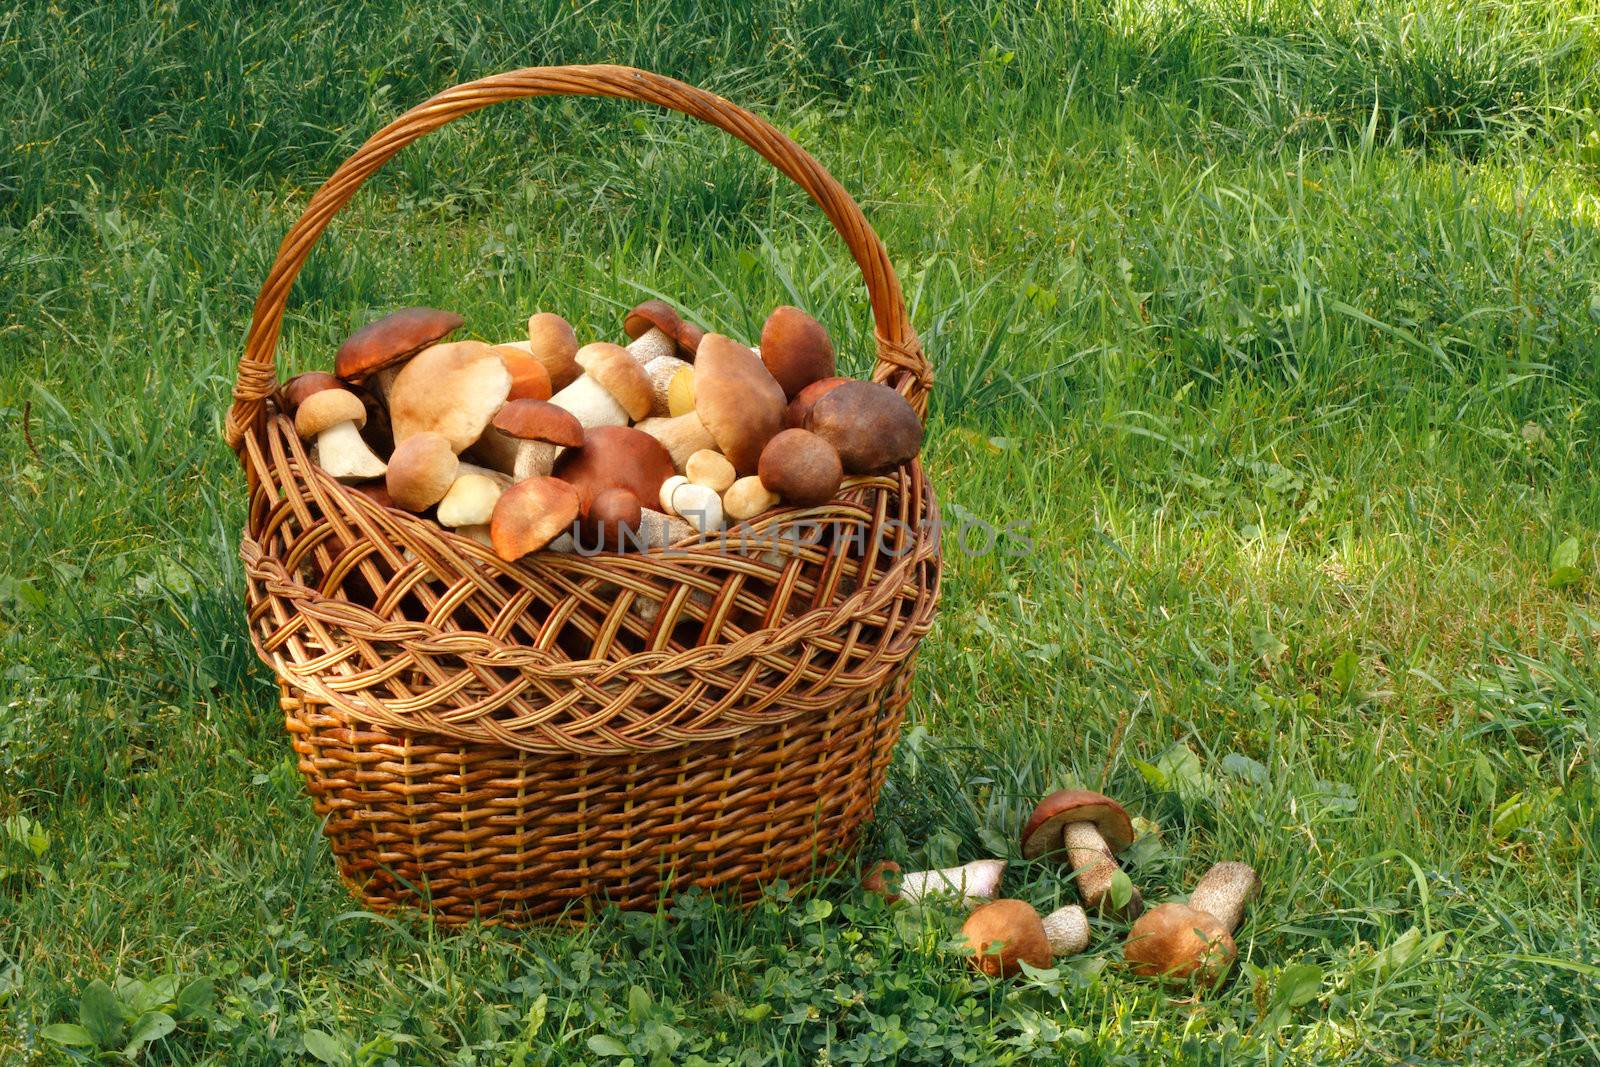 
A large wicker basket filled with lots of different mushrooms, stands on the grass in the forest clearing.